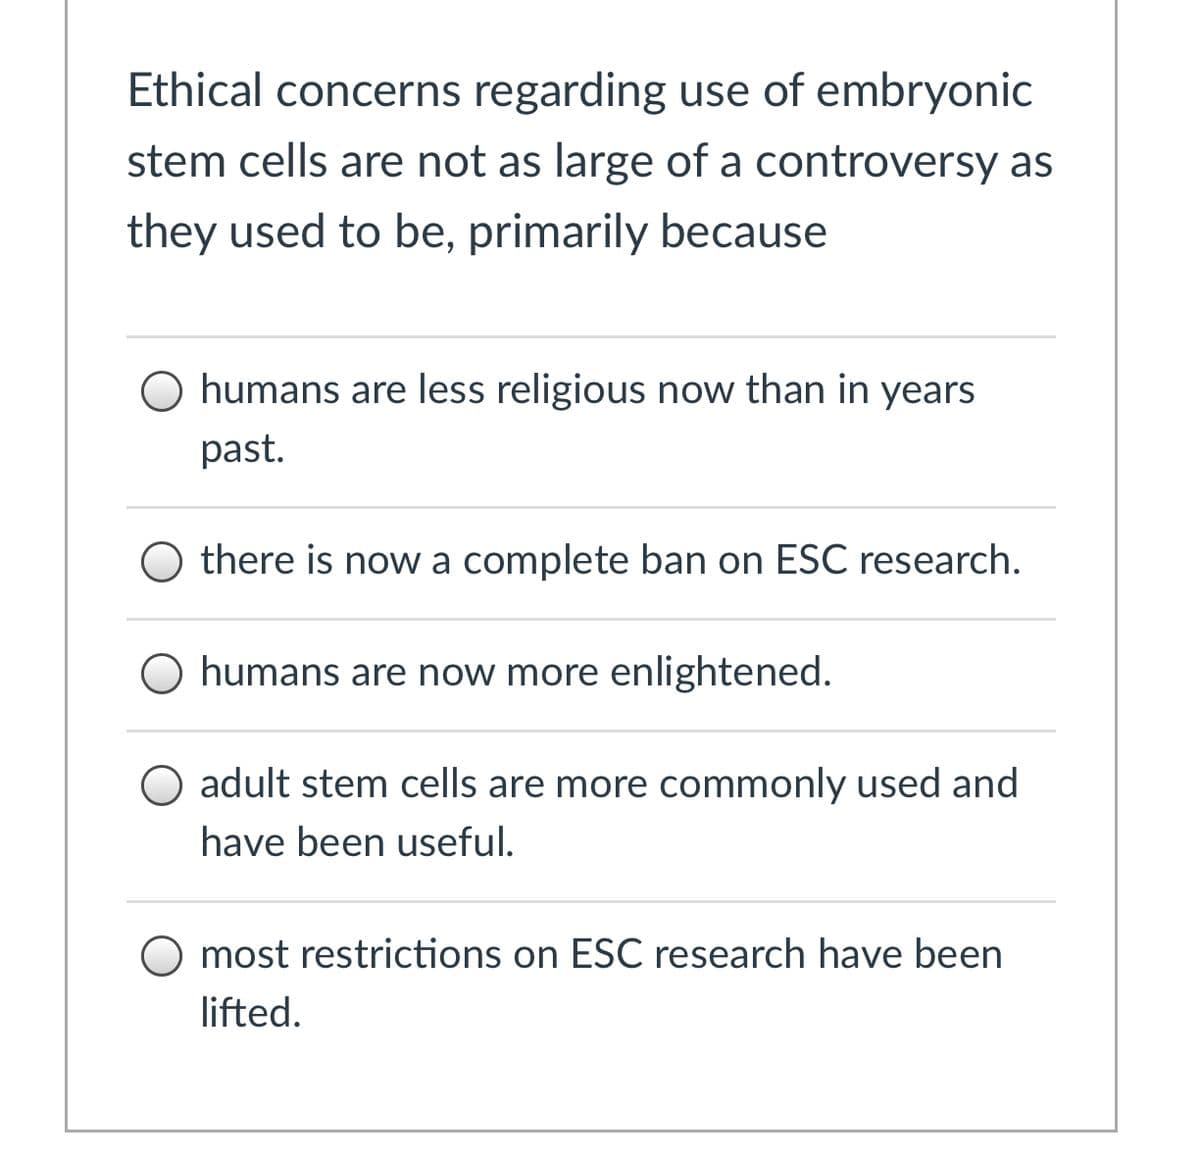 Ethical concerns regarding use of embryonic
stem cells are not as large of a controversy as
they used to be, primarily because
humans are less religious now than in years
past.
there is now a complete ban on ESC research.
O humans are now more enlightened.
O adult stem cells are more commonly used and
have been useful.
O most restrictions on ESC research have been
lifted.
